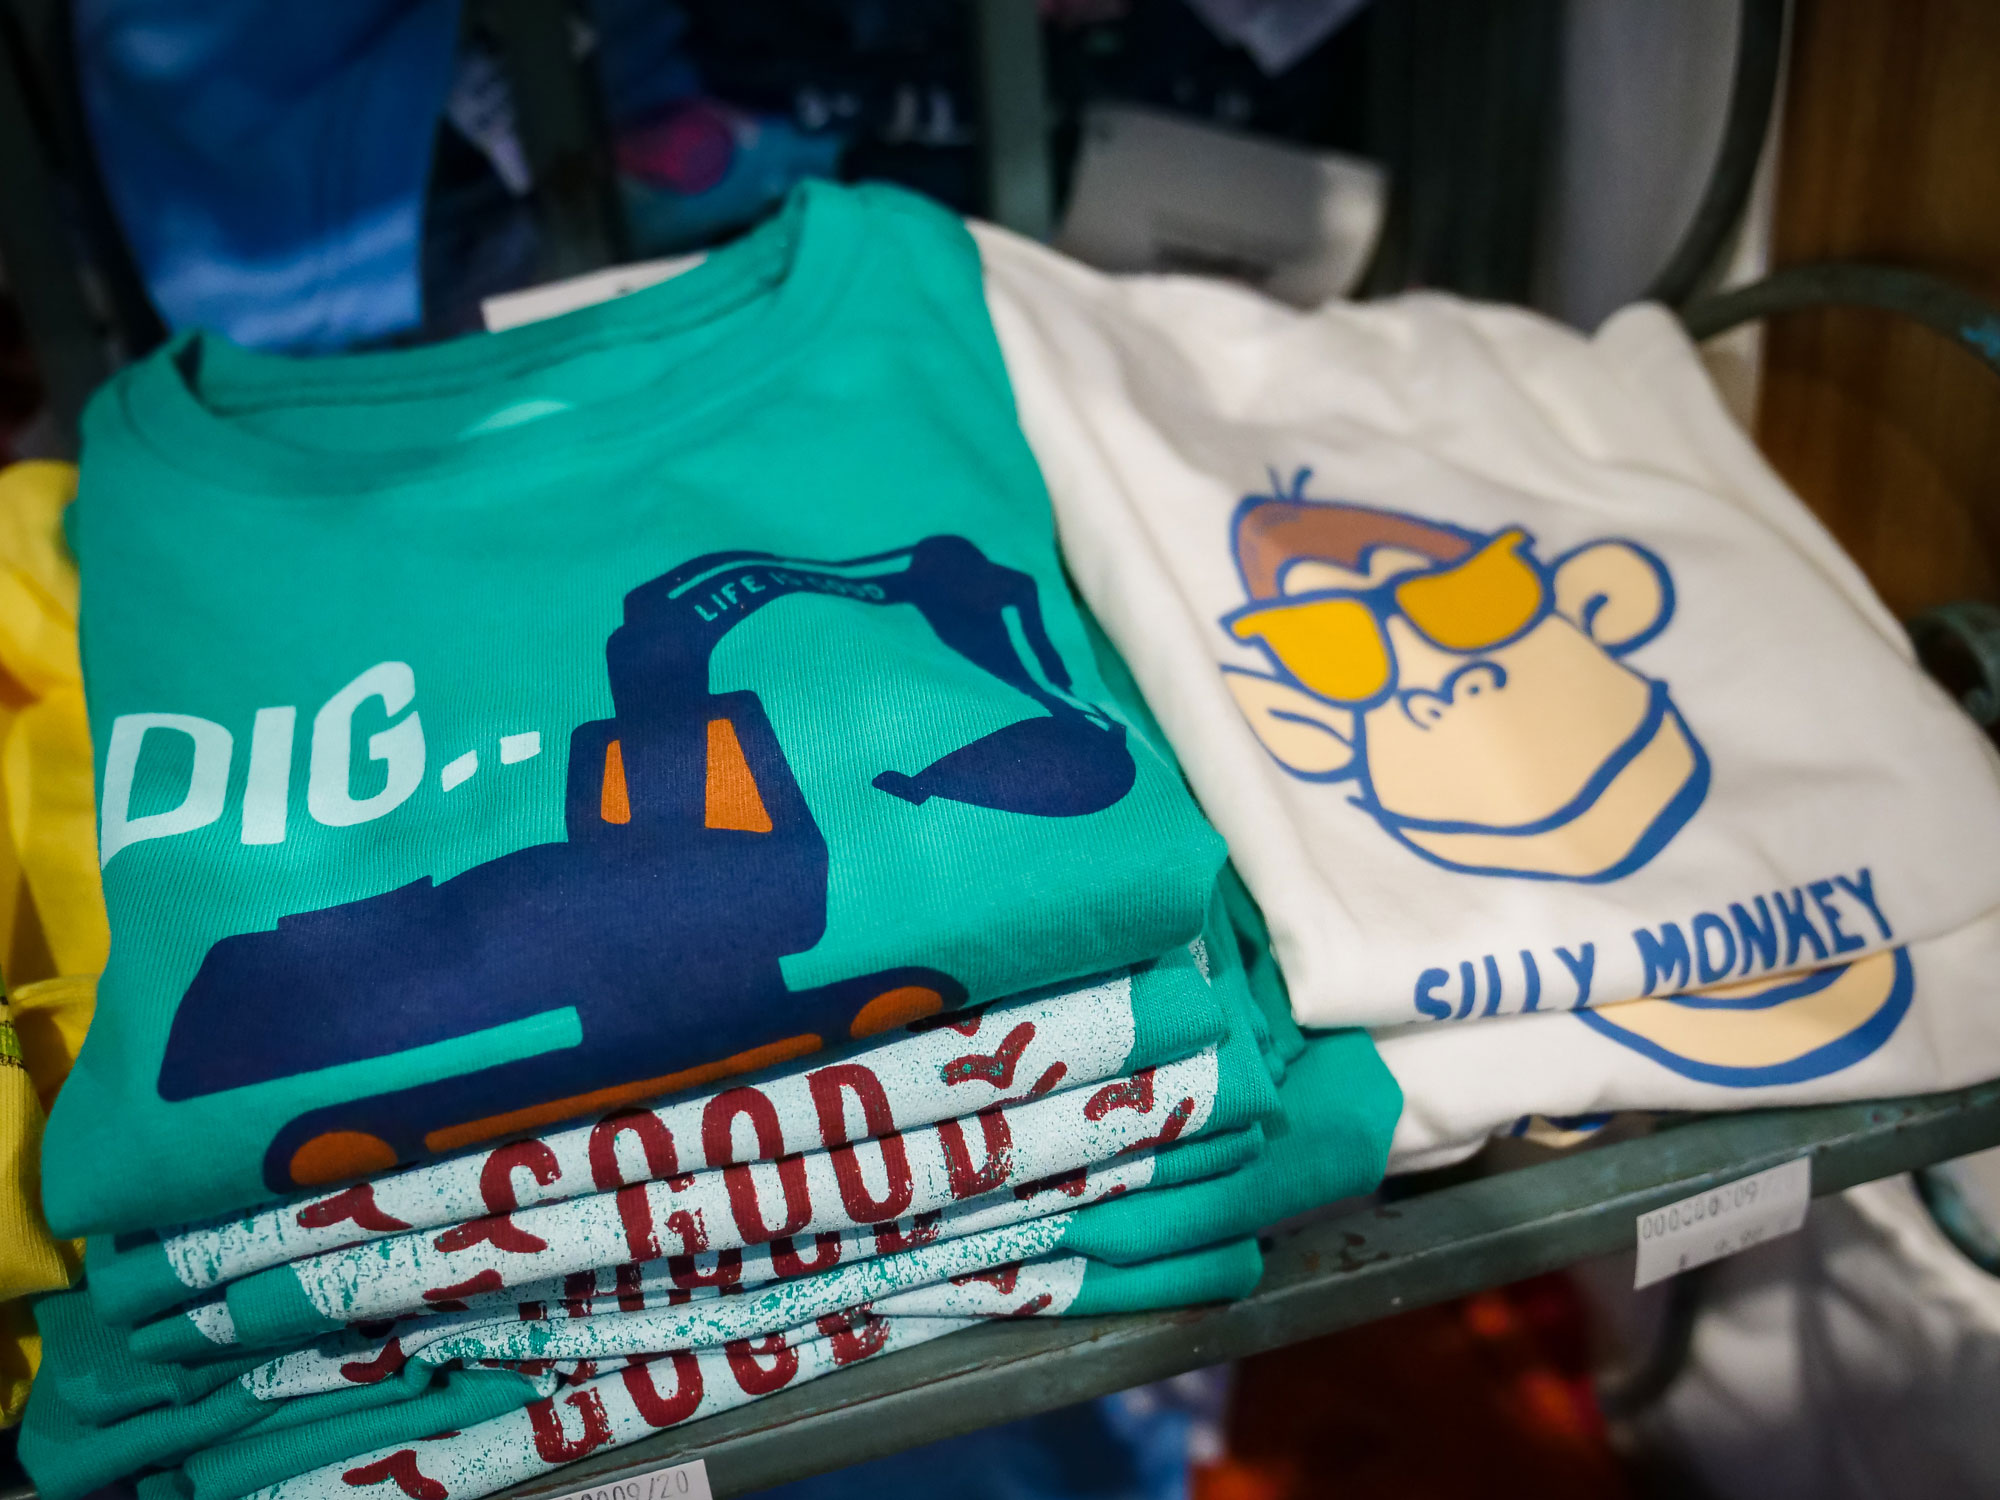 kids shirts at lowry's store in harmony, nc